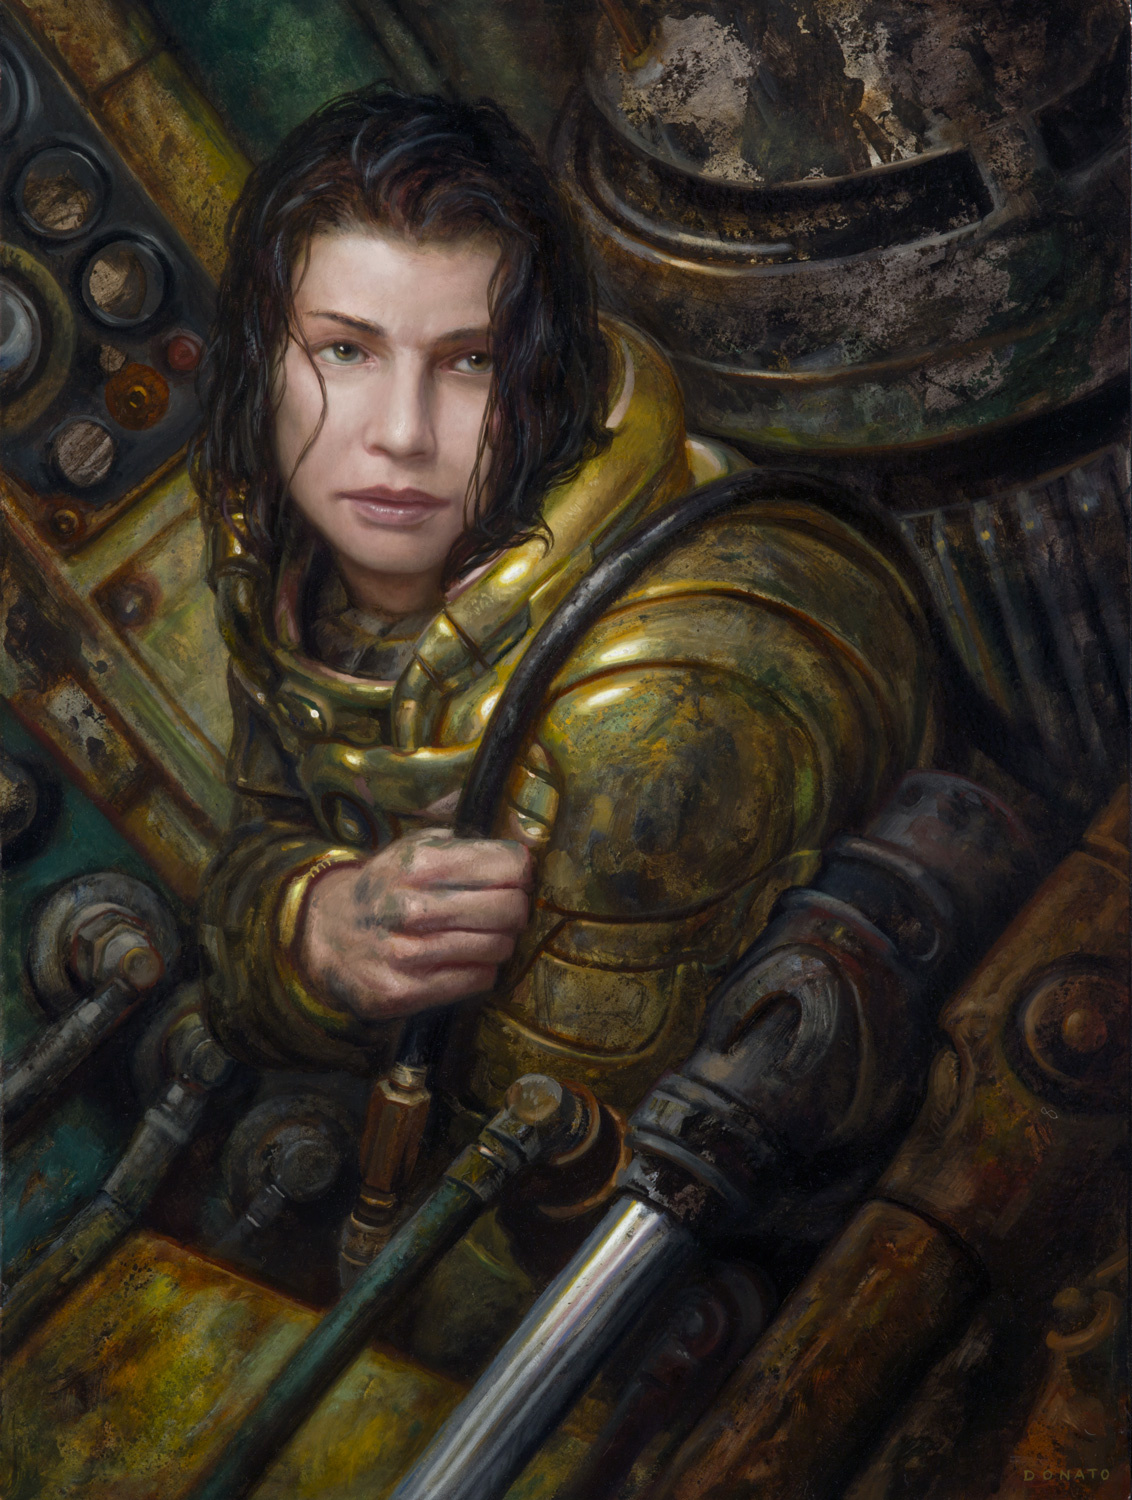 The Mechanic - Thresholds
24" x 18"  Oil on Panel  2019
collection of Lizanne and Paul Lizotte